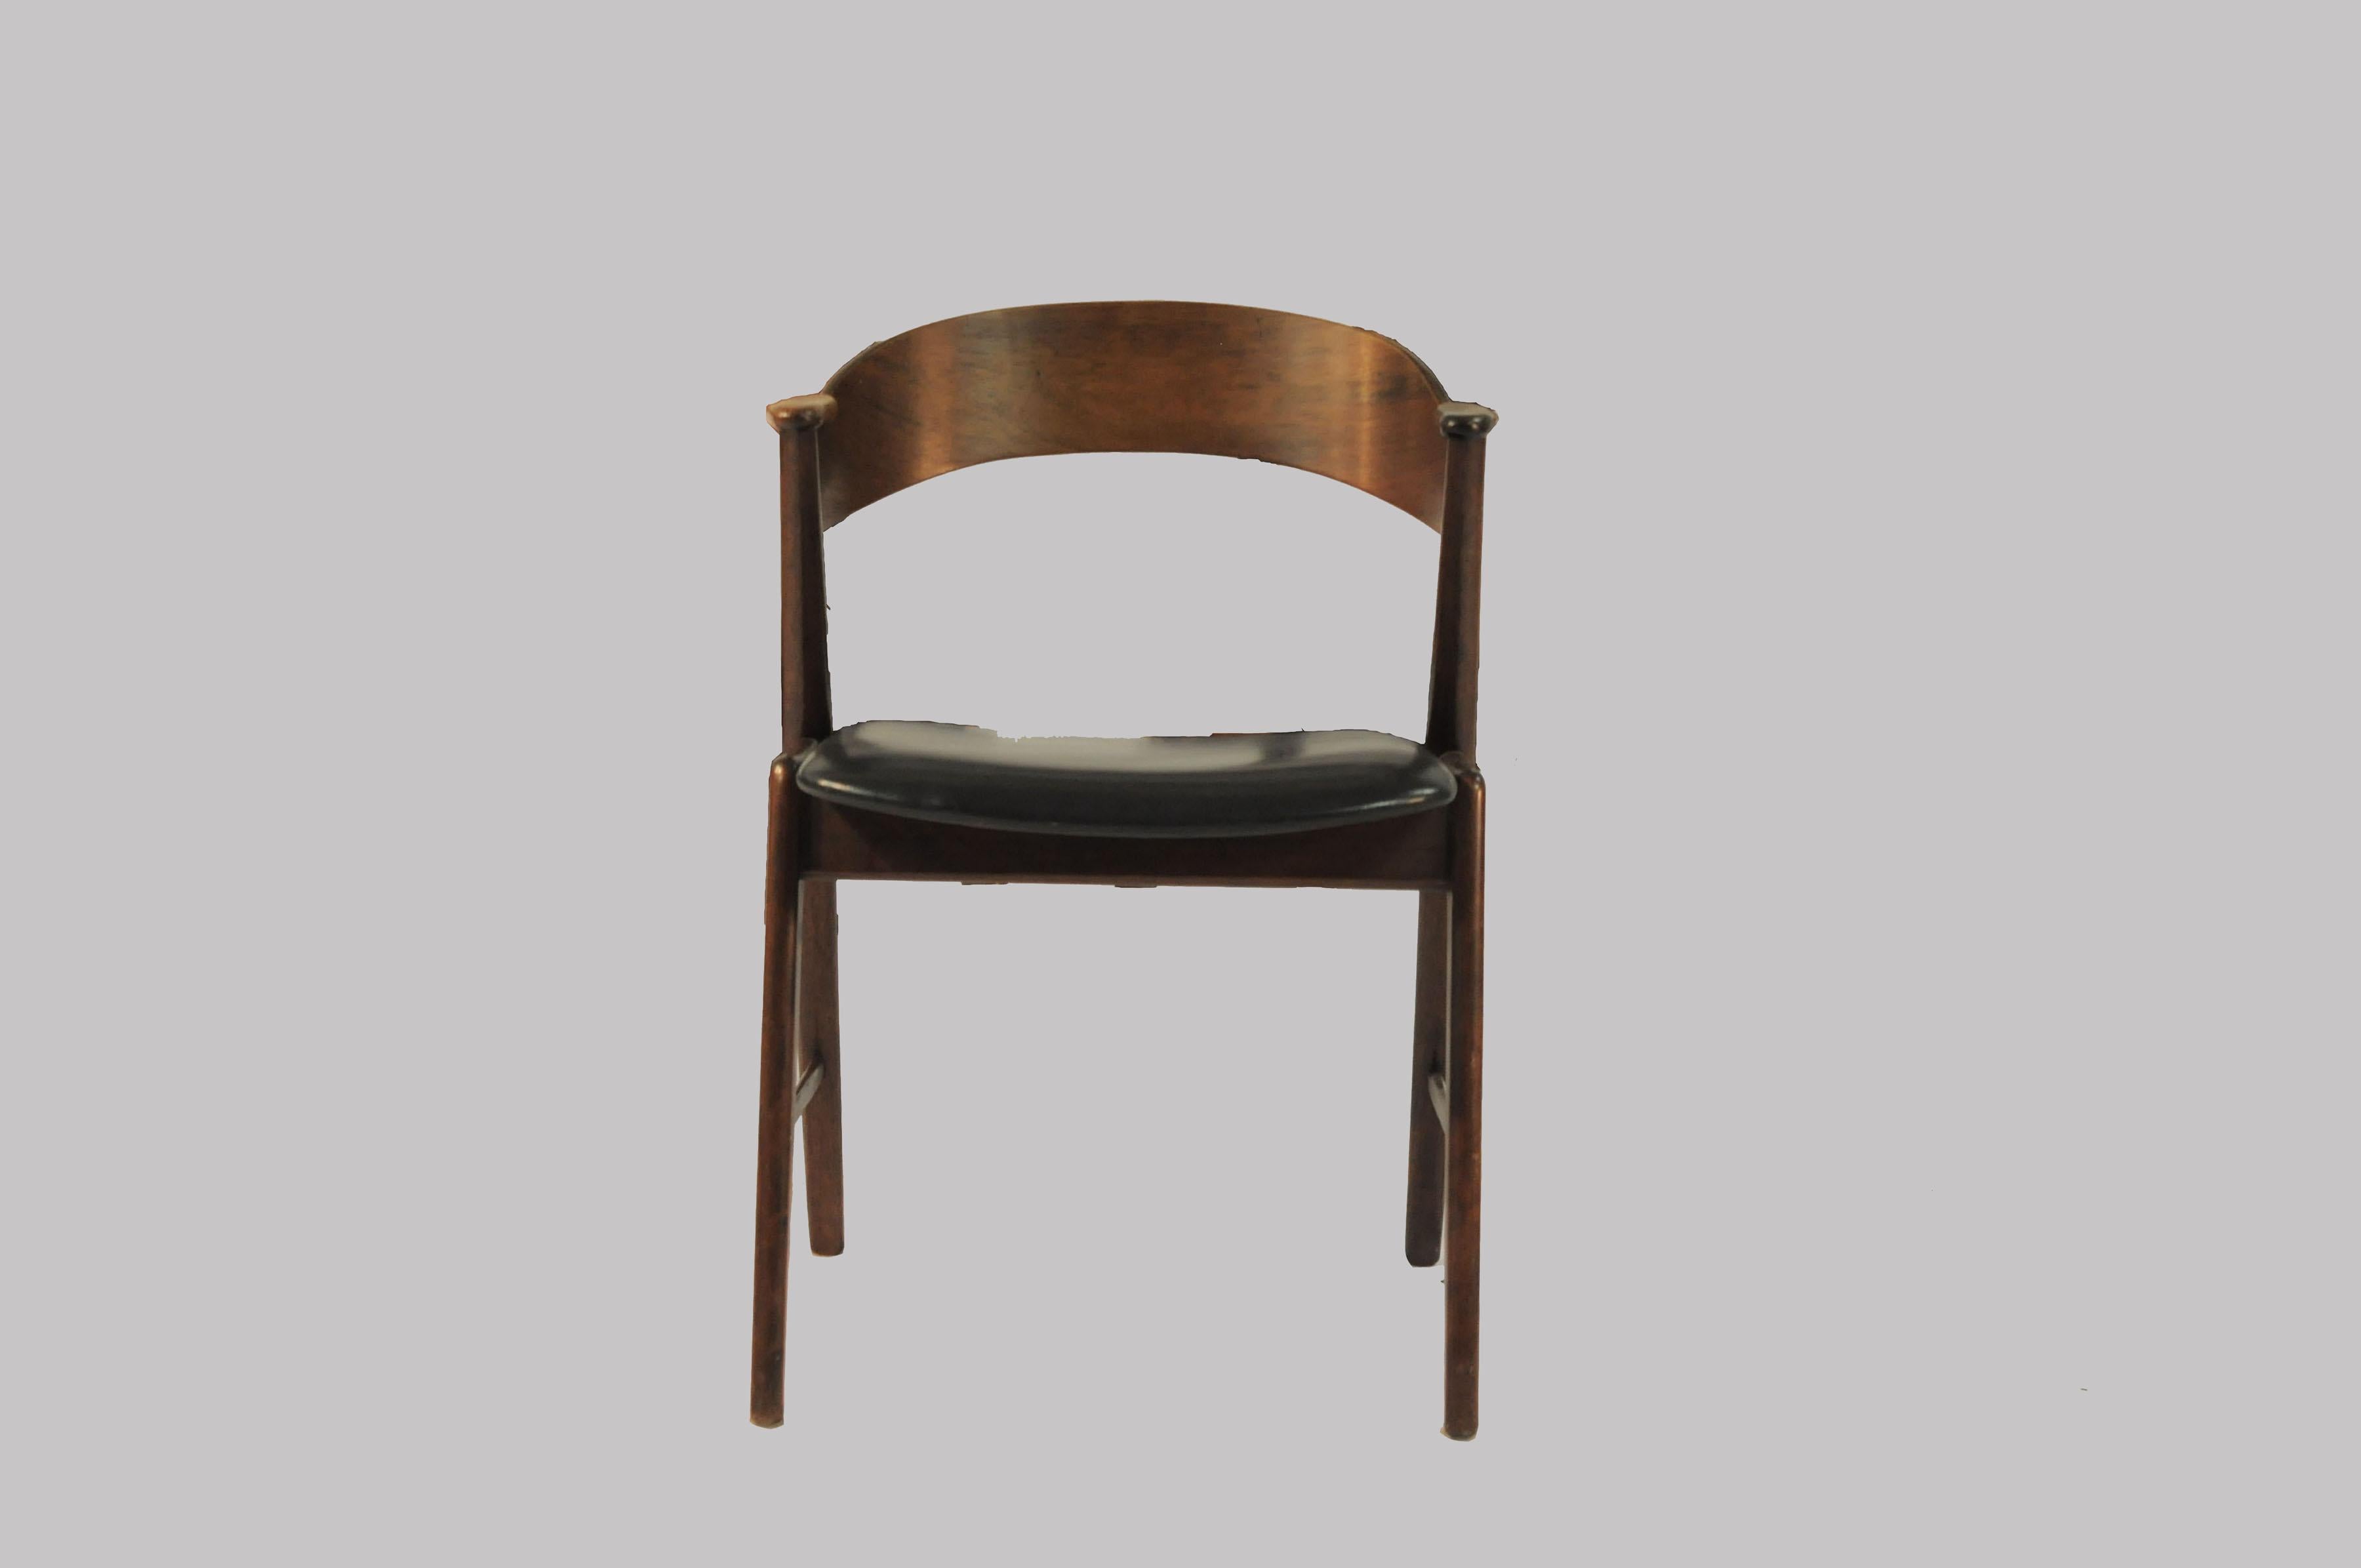 Set of six dining chairs with curved rosewood backrests sliding into rosewood armrests and elegant frames in teak. The chairs are commonly known as model 32 from Korup Stolefabrik

The elegant comfortable classic chairs are very well crafted and